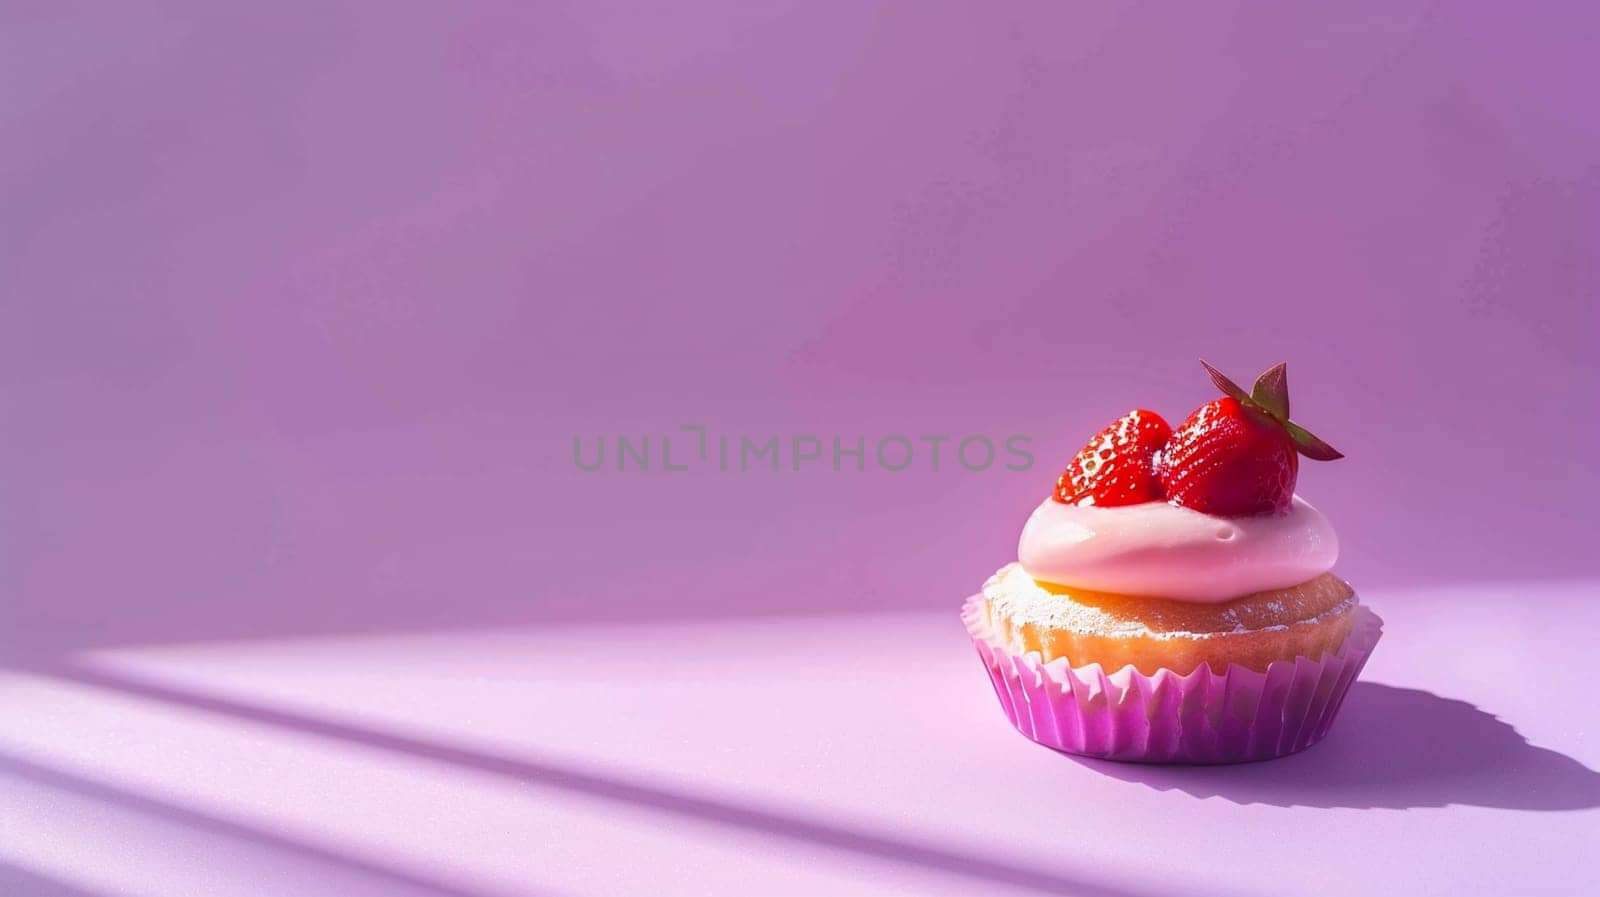 Close-up of a strawberry cupcake topped with cream, set against a vibrant purple background. Ideal image for bakery marketing and sweet delicacy.